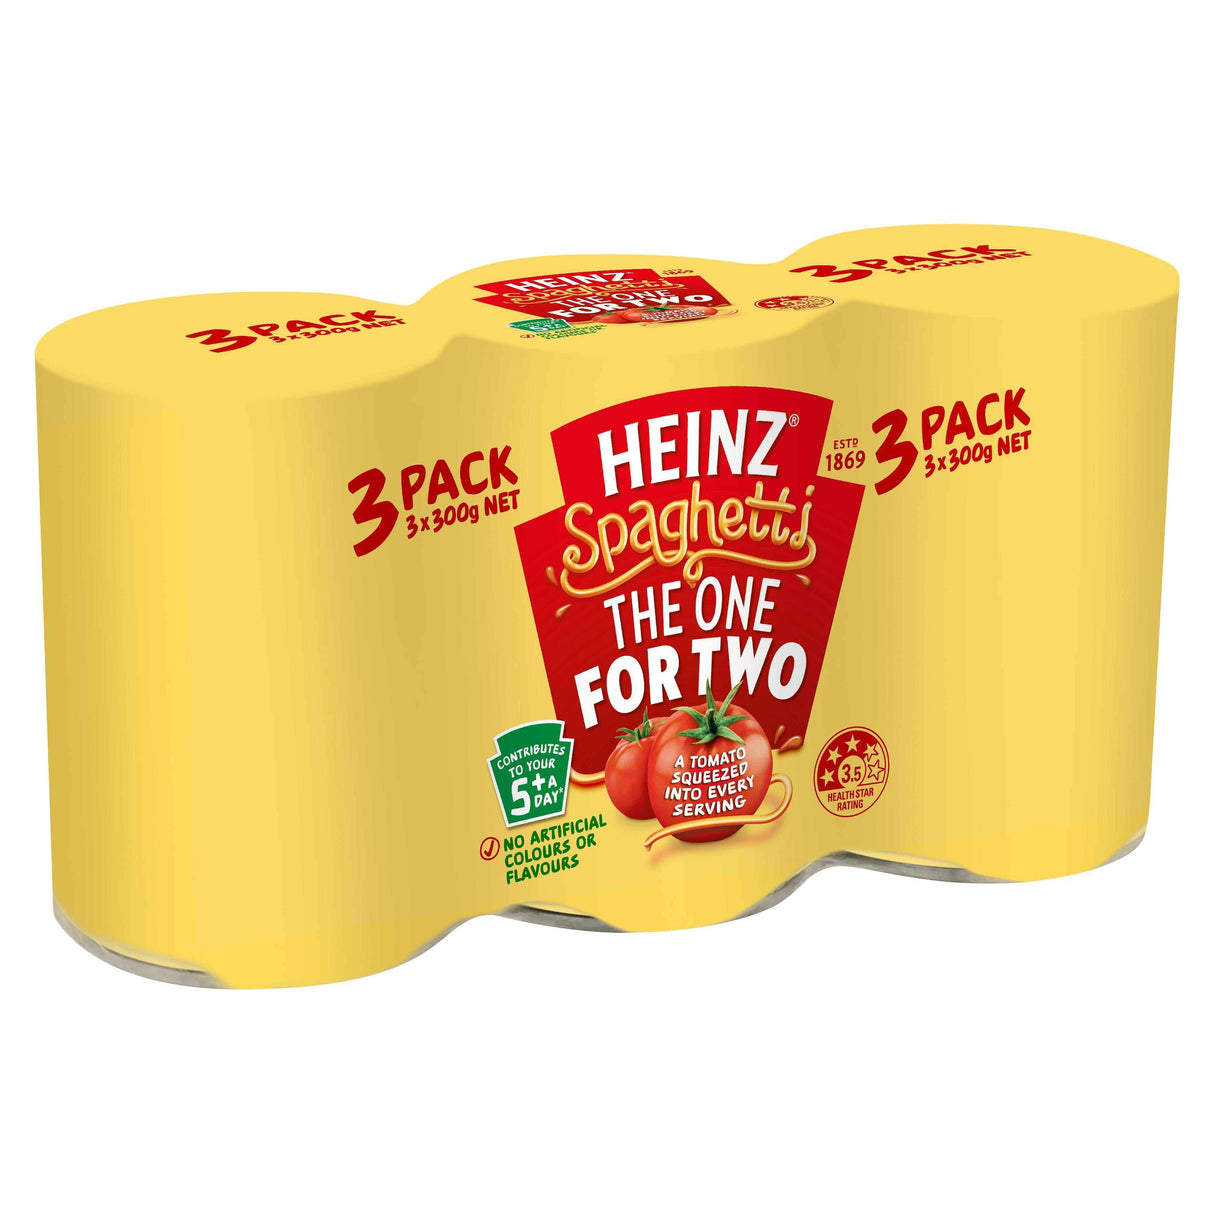 Heinz Spaghetti The One For Two 3x300g